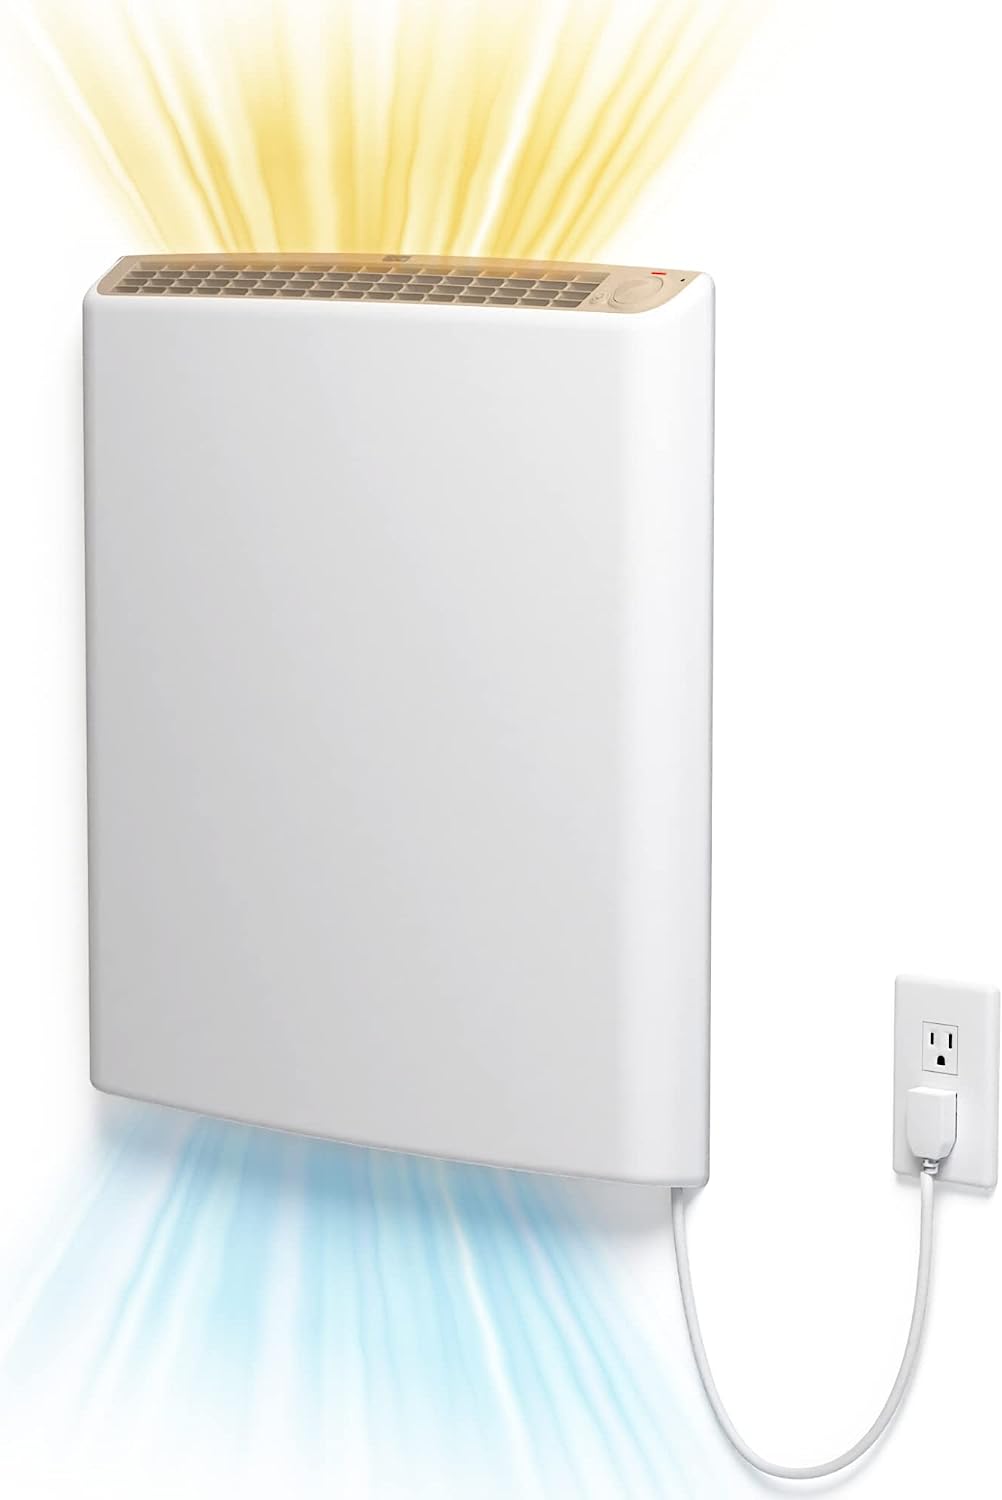 Envi Plug-in Electric Panel Wall Heaters for Indoor [...]